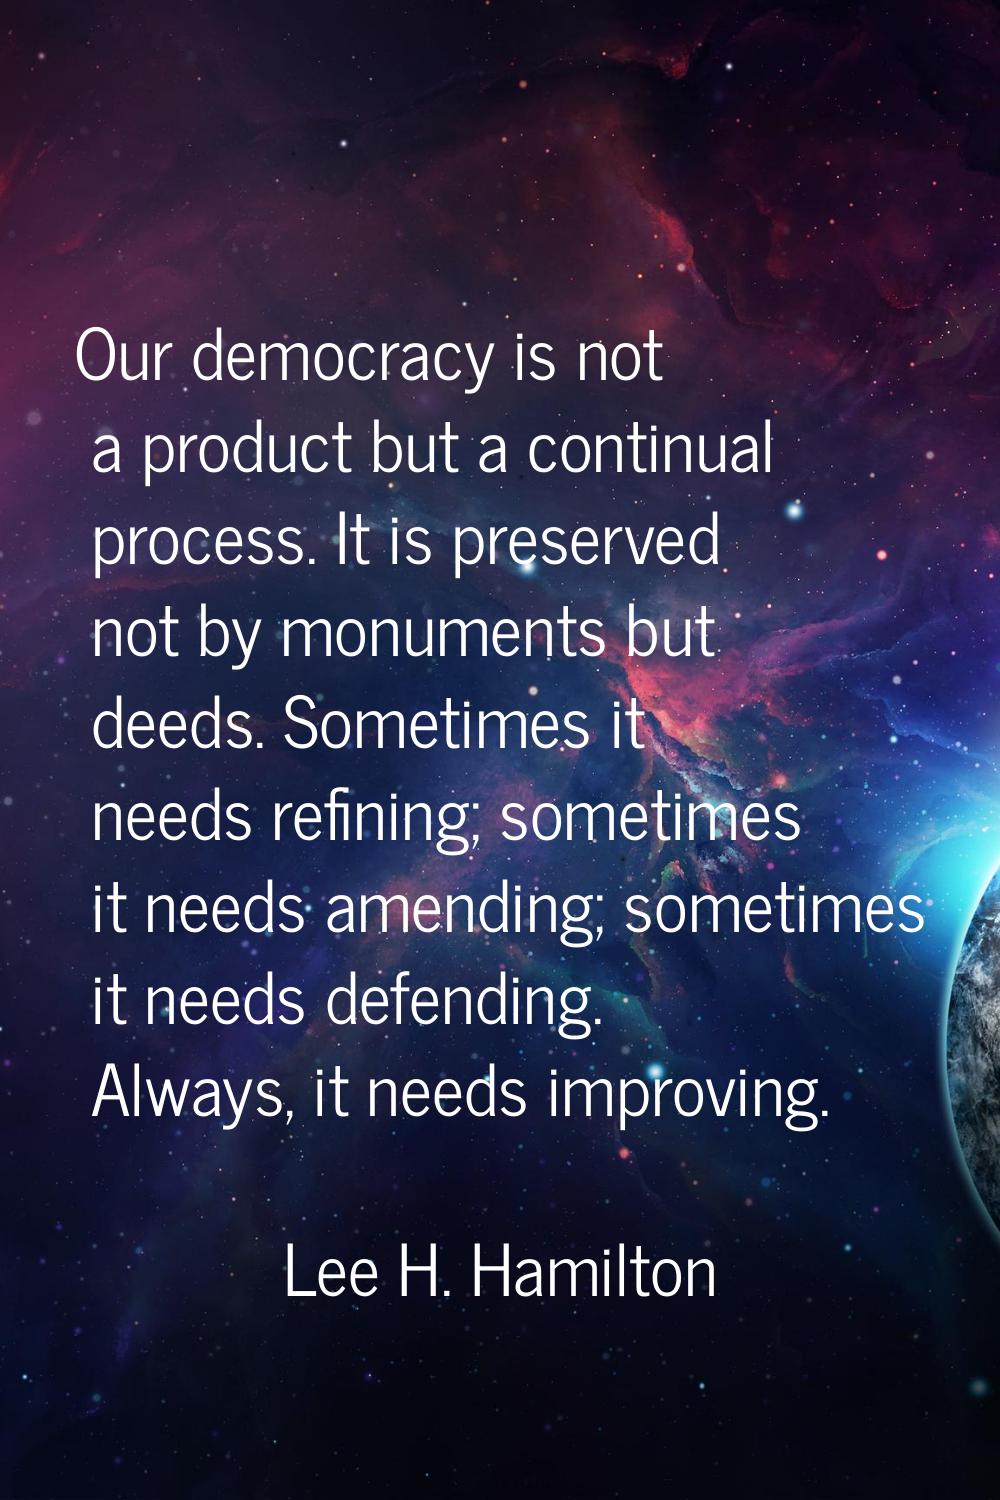 Our democracy is not a product but a continual process. It is preserved not by monuments but deeds.